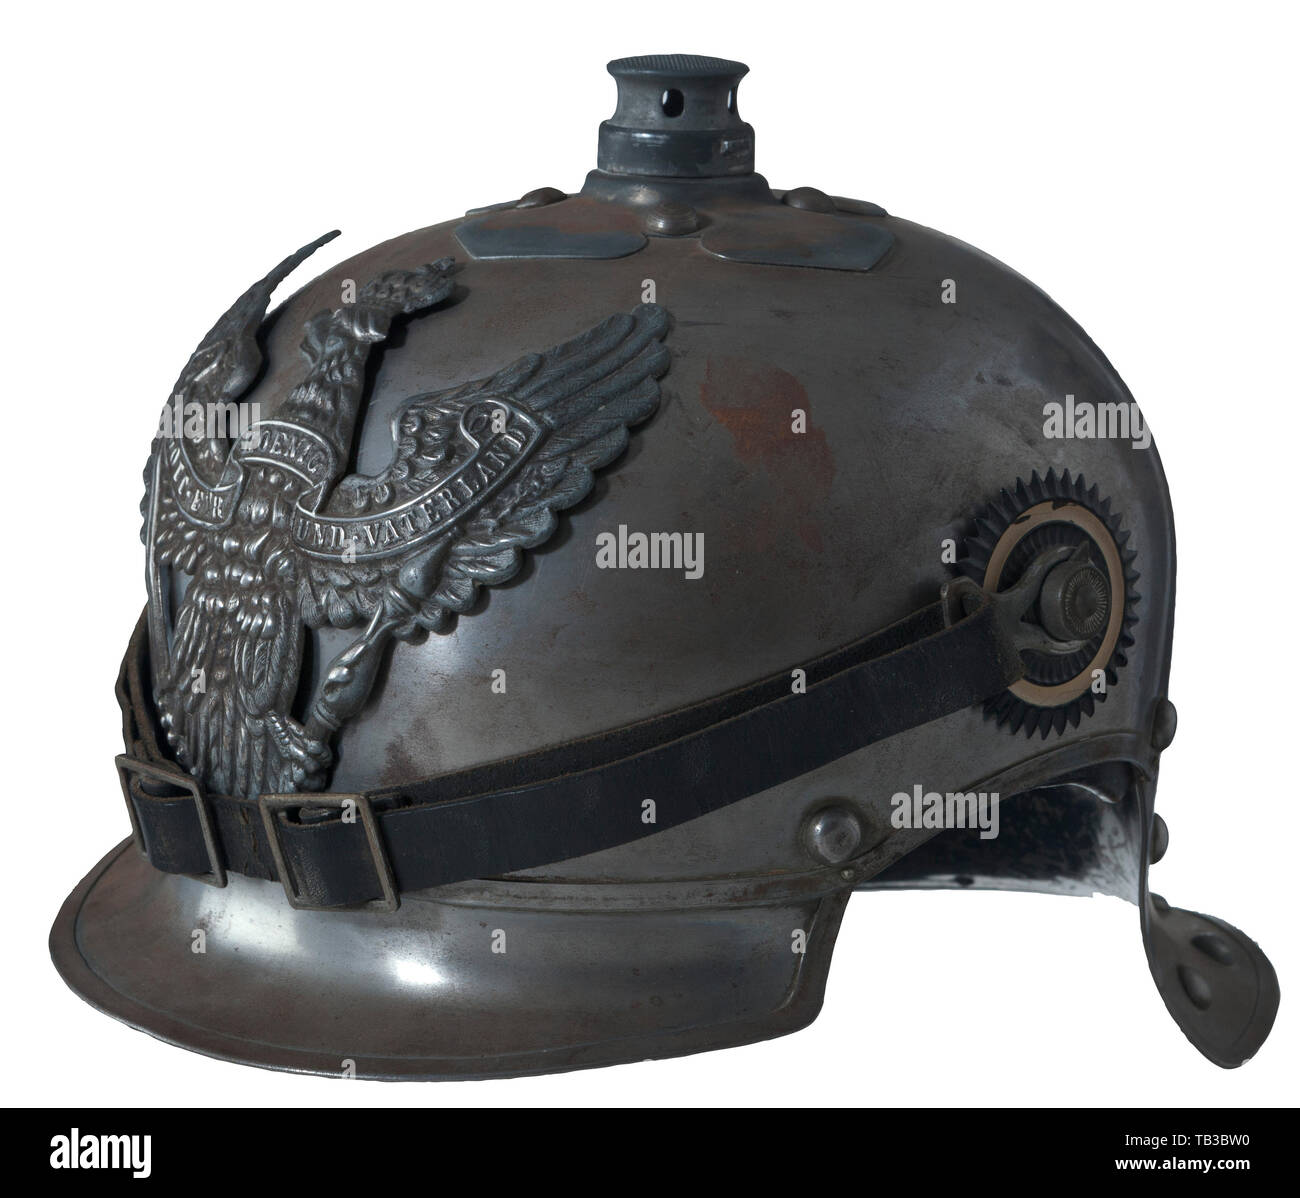 An Imperial German war model for enlisted men of mounted rifles helmet, Metal lobster tail body with front visor, grey Prussian eagle attached by two loops and leather strip (no leather strip for left loop), grey spike base and base studs (partial polished to steel finish), black leather chinstrap with grey buckles and M 91 lug side posts, light brown leather liner, small national and Prussian state cockades, black paint under rear visor, green paint under front visor, maker's mark inside body, no spike. USA-lot. Prussian, Prussia, German, German, Additional-Rights-Clearance-Info-Not-Available Stock Photo